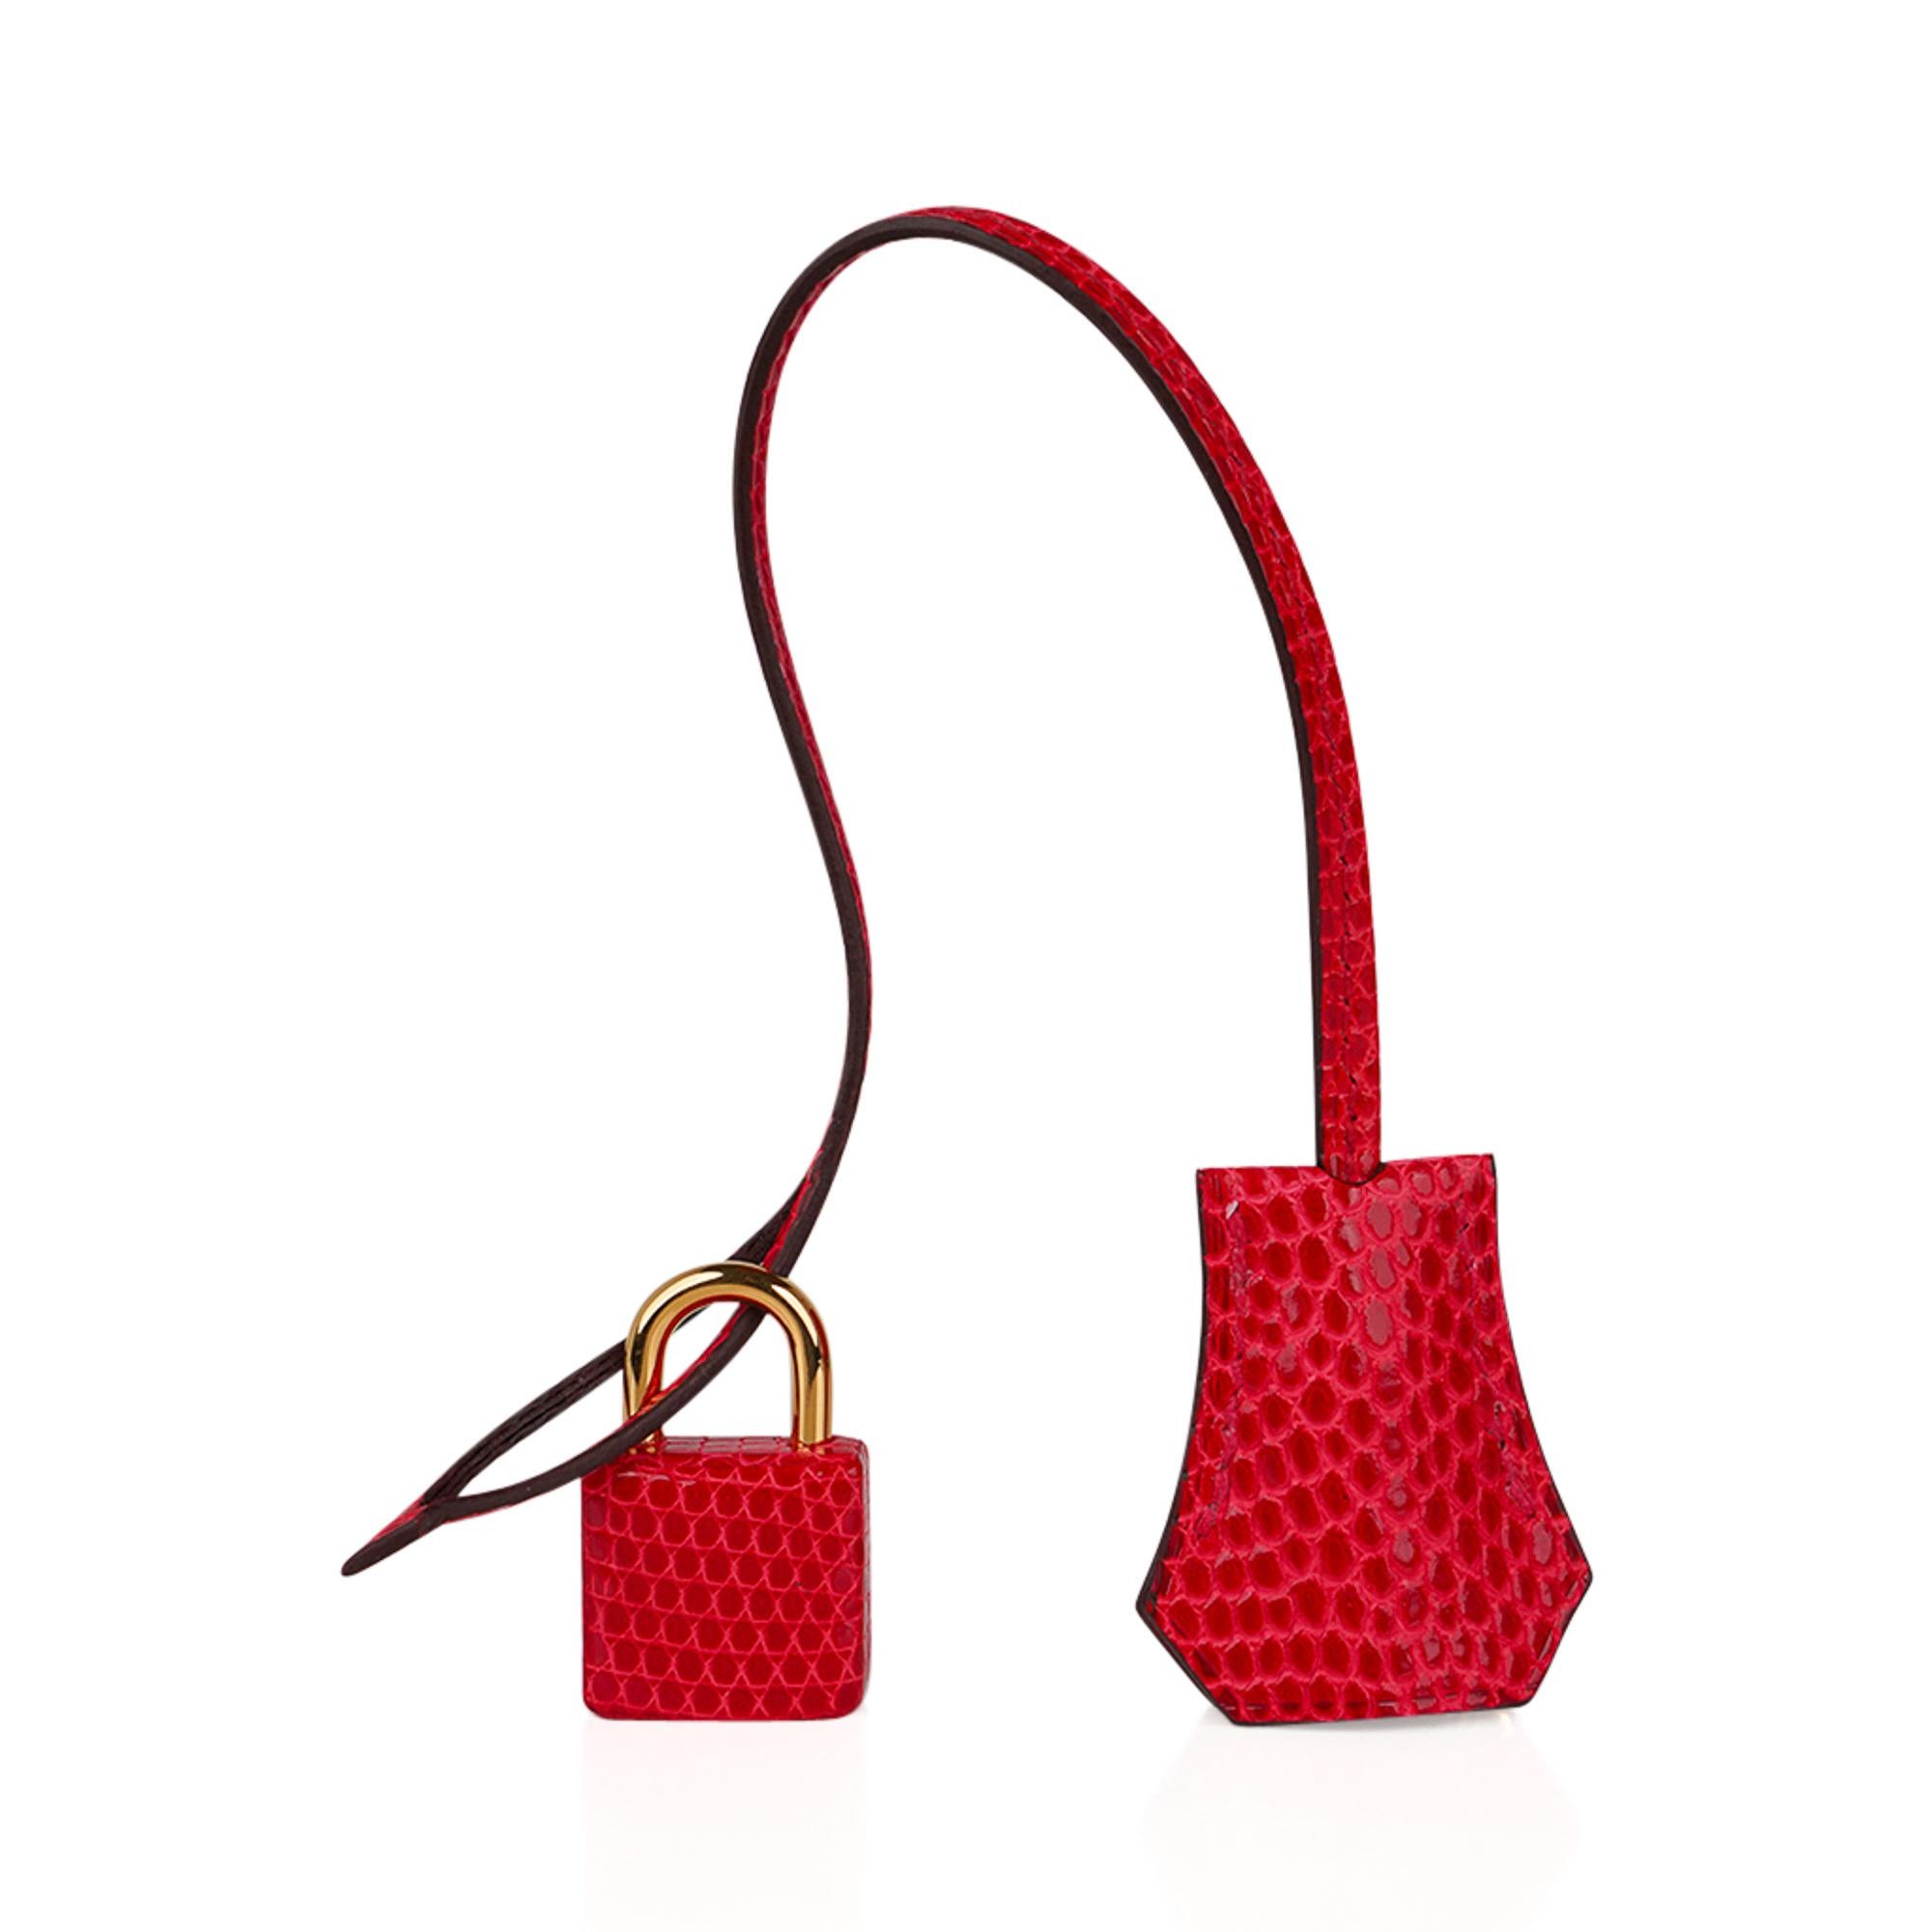 Mightychic offers a guaranteed authentic Rouge Exotique Lizard featured in a limited edition Hermes Birkin 30 bag.
This exquisitely beautiful Hermes bag is featured in a vivid lipstick red.
Lizard only becomes more beautiful and supple with